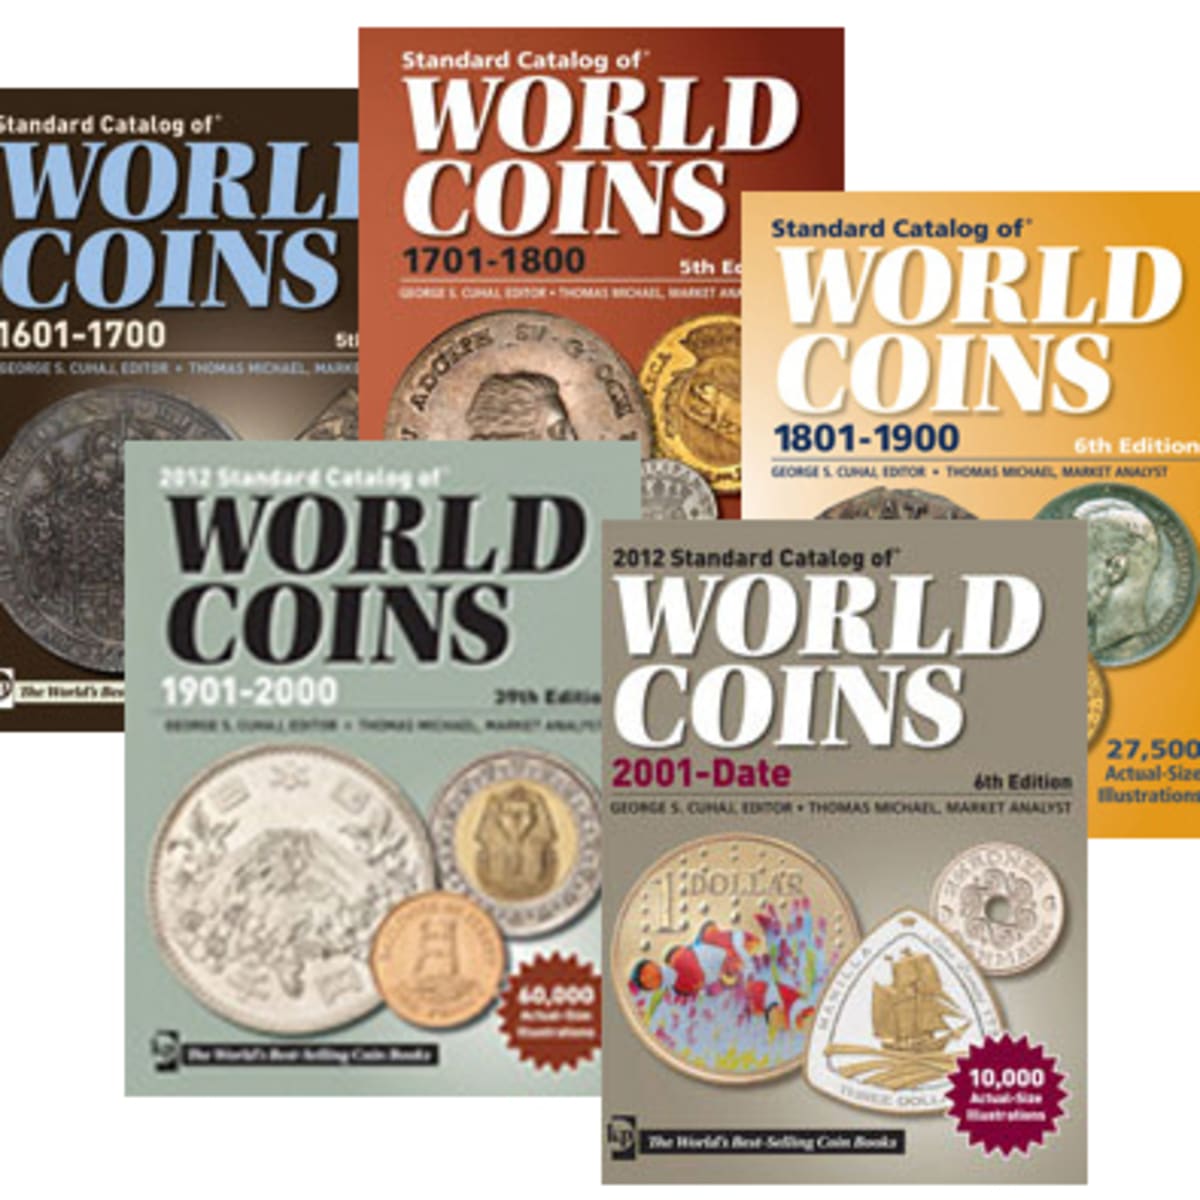 50% Off Standard Catalog of World Coins Value Pack - Numismatic News